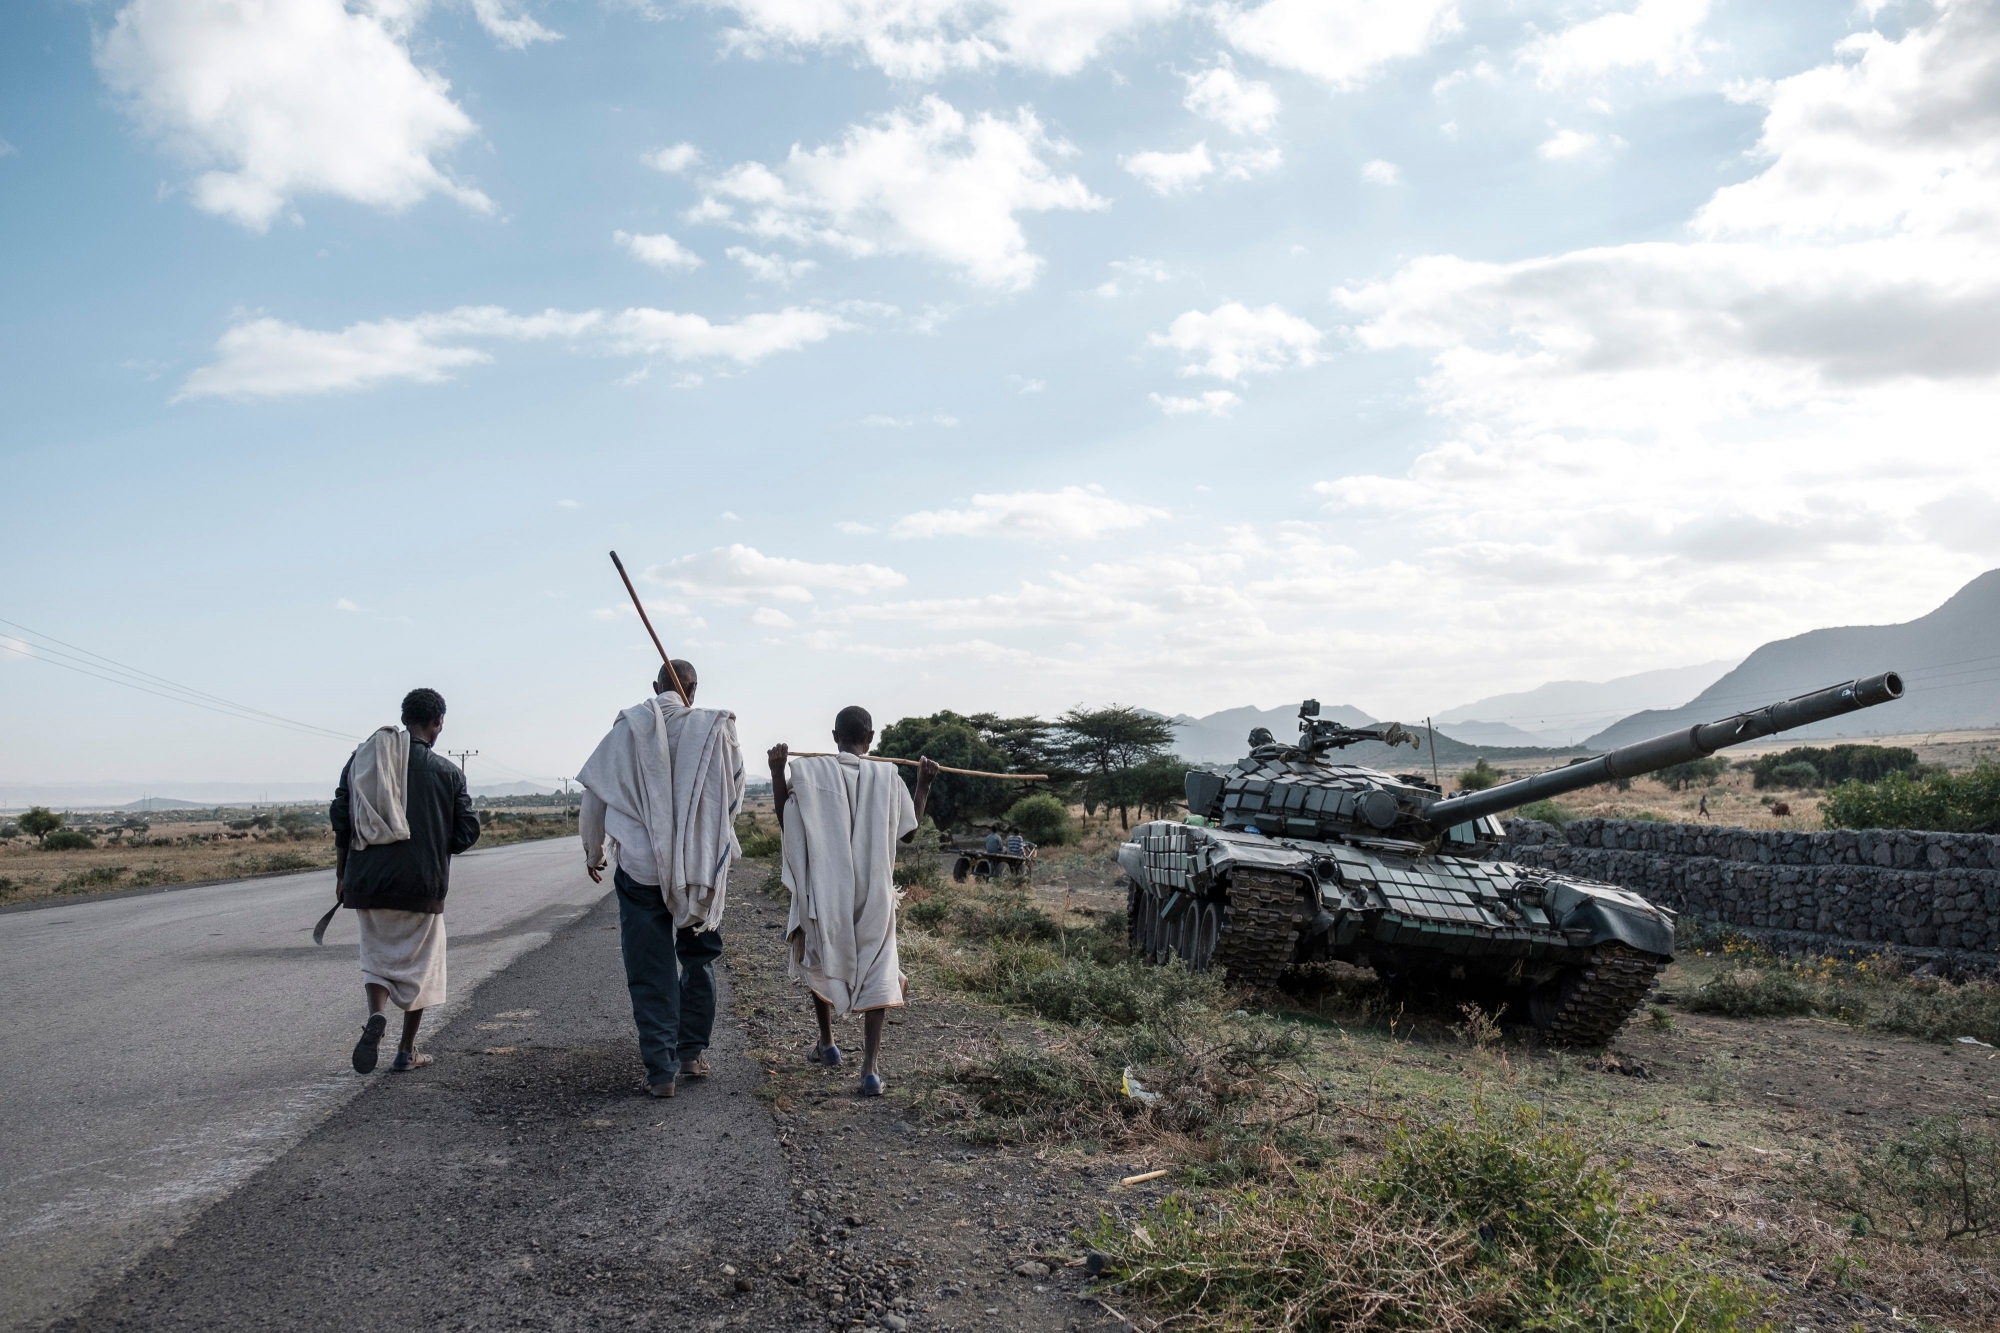 TOPSHOT - People walk next to an abandoned tank belonging to Tigrayan forces south of the town of Mehoni, Ethiopia, on December 11, 2020. The town of Mehoni, located in Southern Tigray, experienced shelling resulting in civilian deaths and injured people. (Photo by EDUARDO SOTERAS / AFP) (KEYSTONE/AFP/EDUARDO SOTERAS)